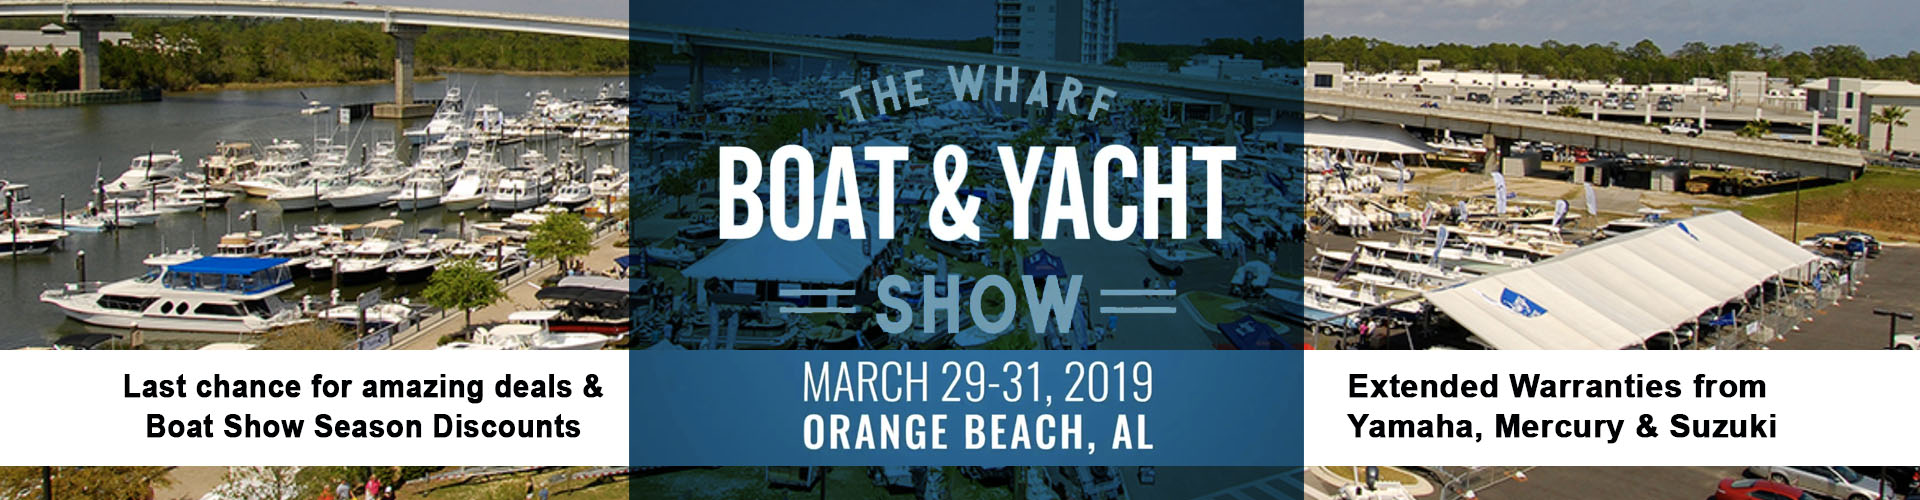 Wharf Boat And Yacht Show Ocean Marine Group Ocean Springs Mississippi